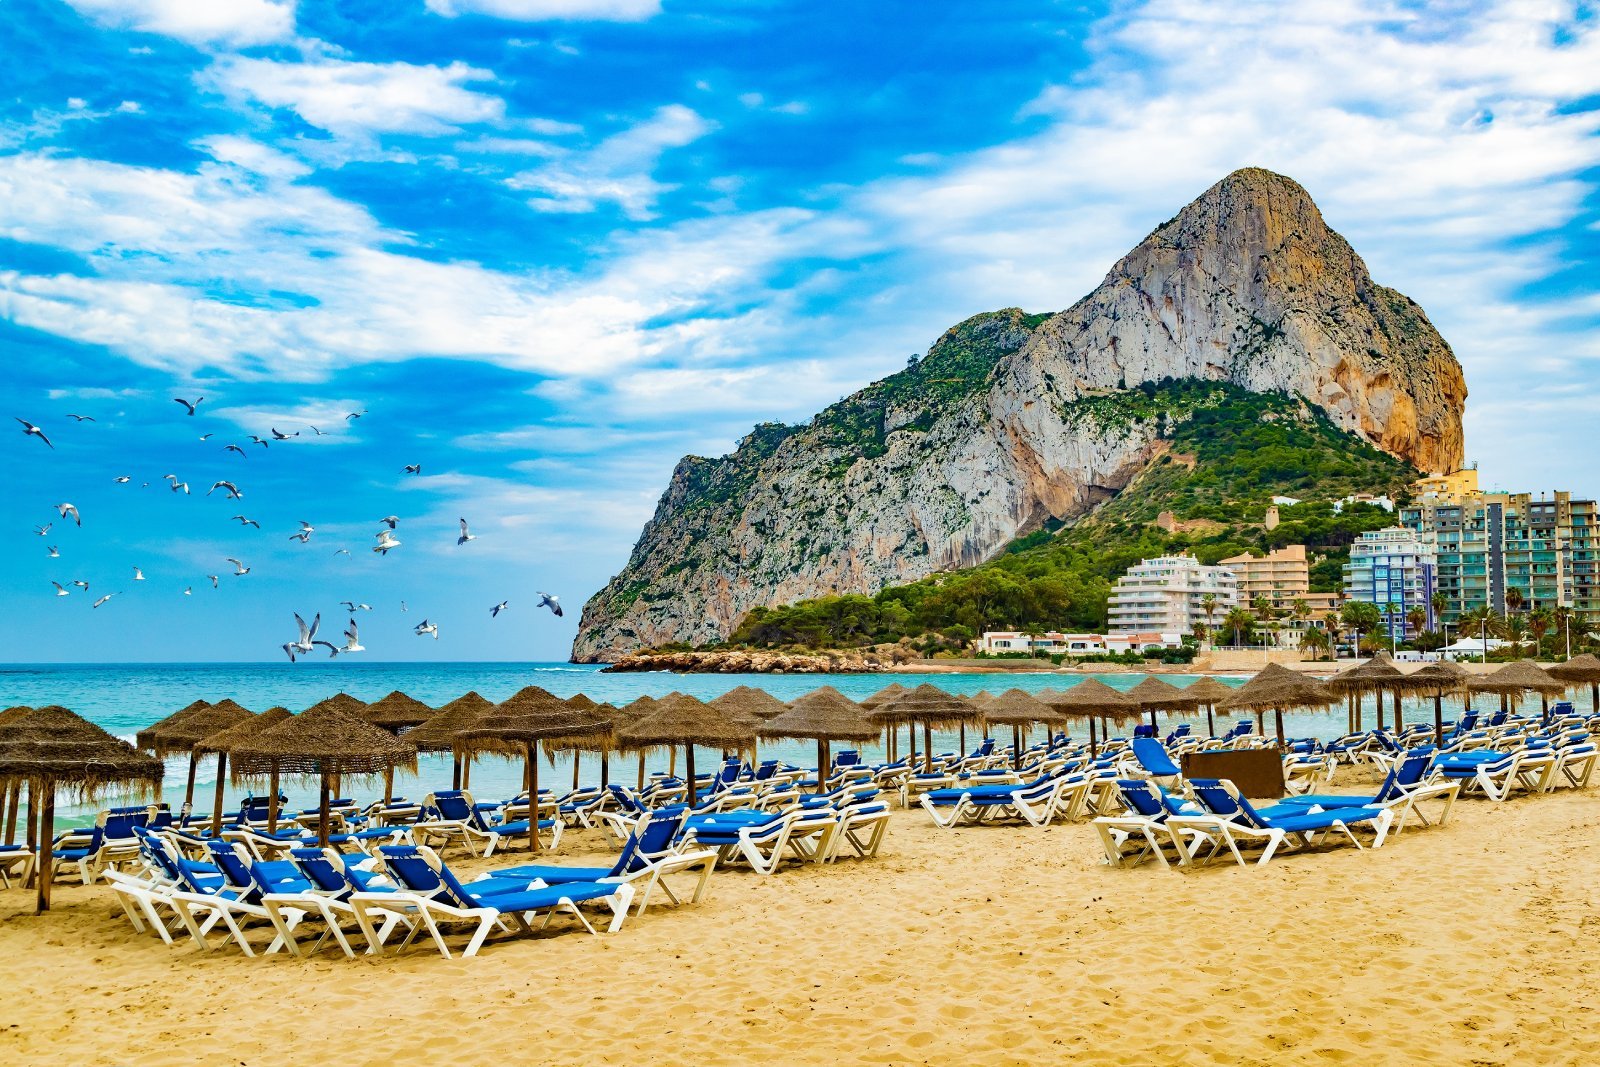 <p class="wp-caption-text">Image Credit: Shutterstock / carlos castilla</p>  <p><span>Exchange rate in your favor? Alicante offers Mediterranean bliss with apartment rentals around €700 a month. Or, park your RV by the sea for less. For a truly unique experience, stay in a castle hotel. Because who hasn’t dreamed of being royalty, if only for the winter?</span></p>